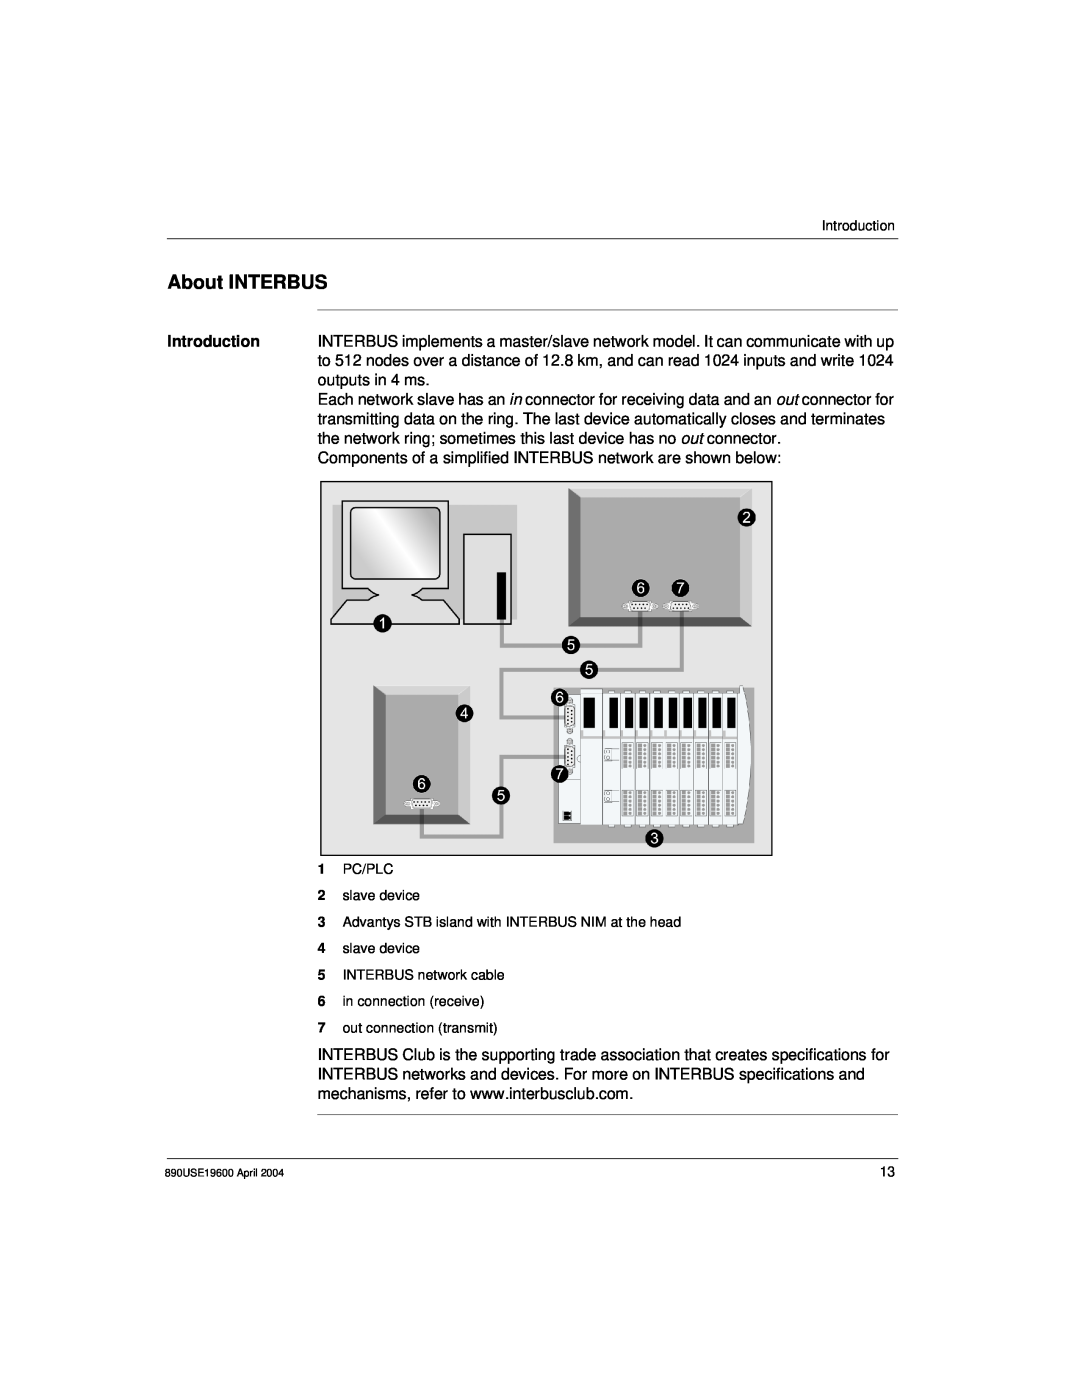 Schneider Electric INTERBUS Basic Network Interface Module, 890USE19600 Version 1.0 manual About INTERBUS, outputs in 4 ms 